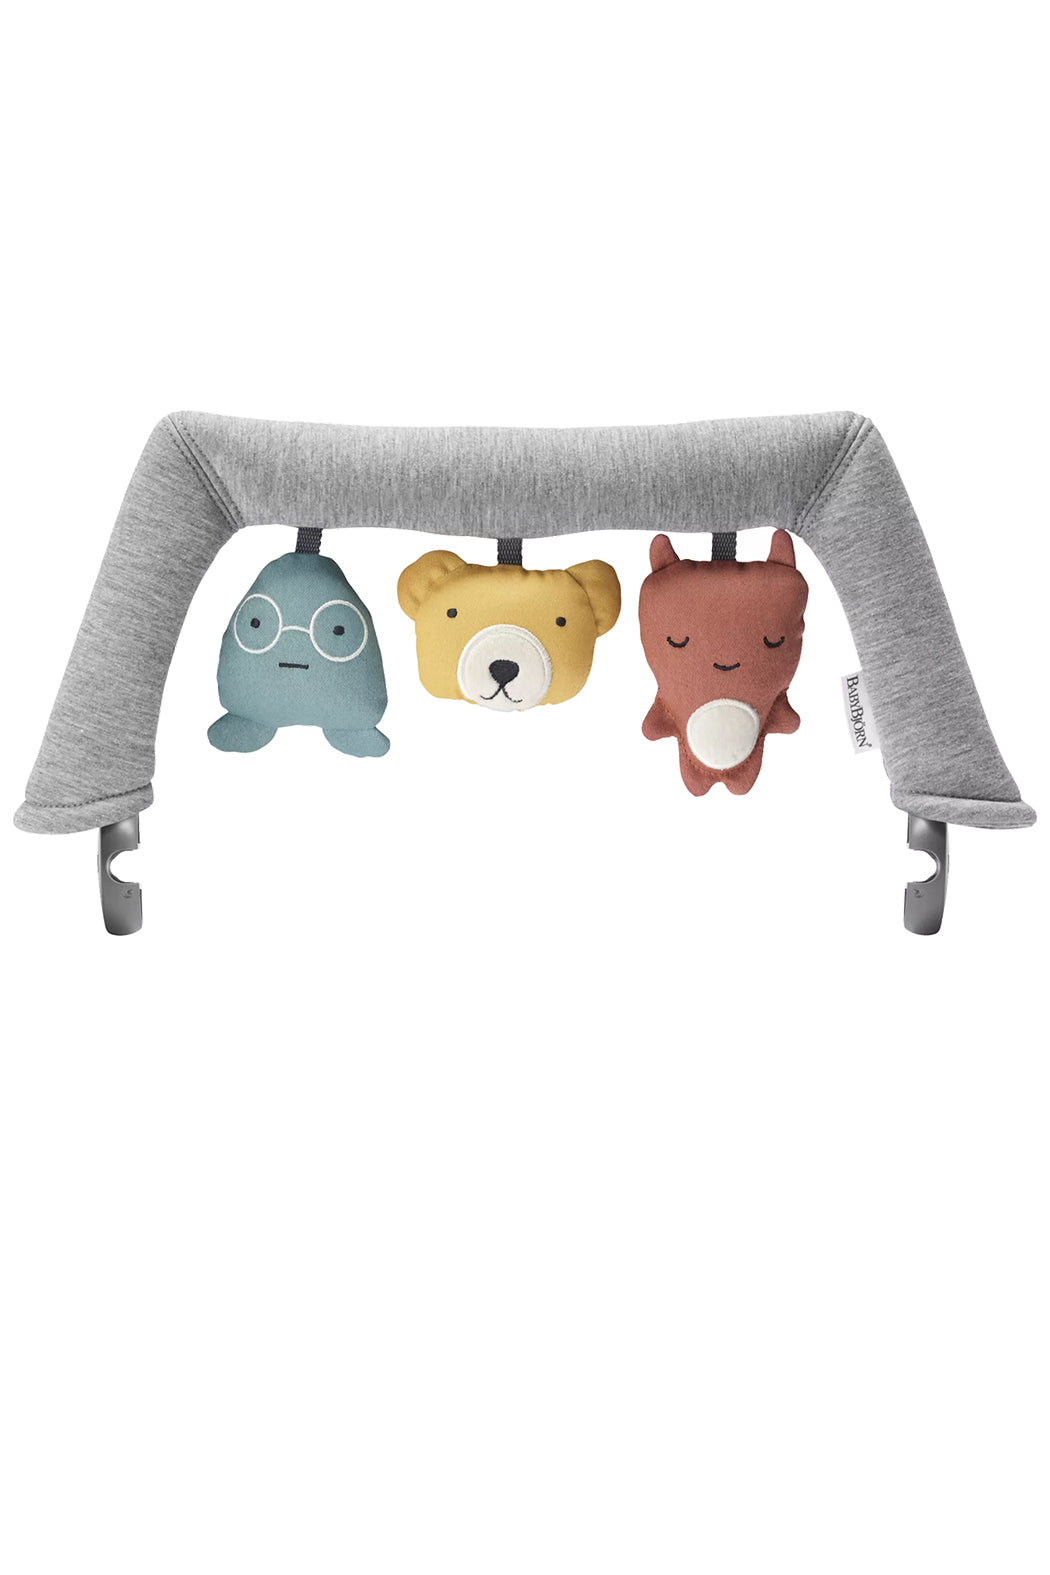 Baby Bjorn Toy For Bouncer - Soft Friends